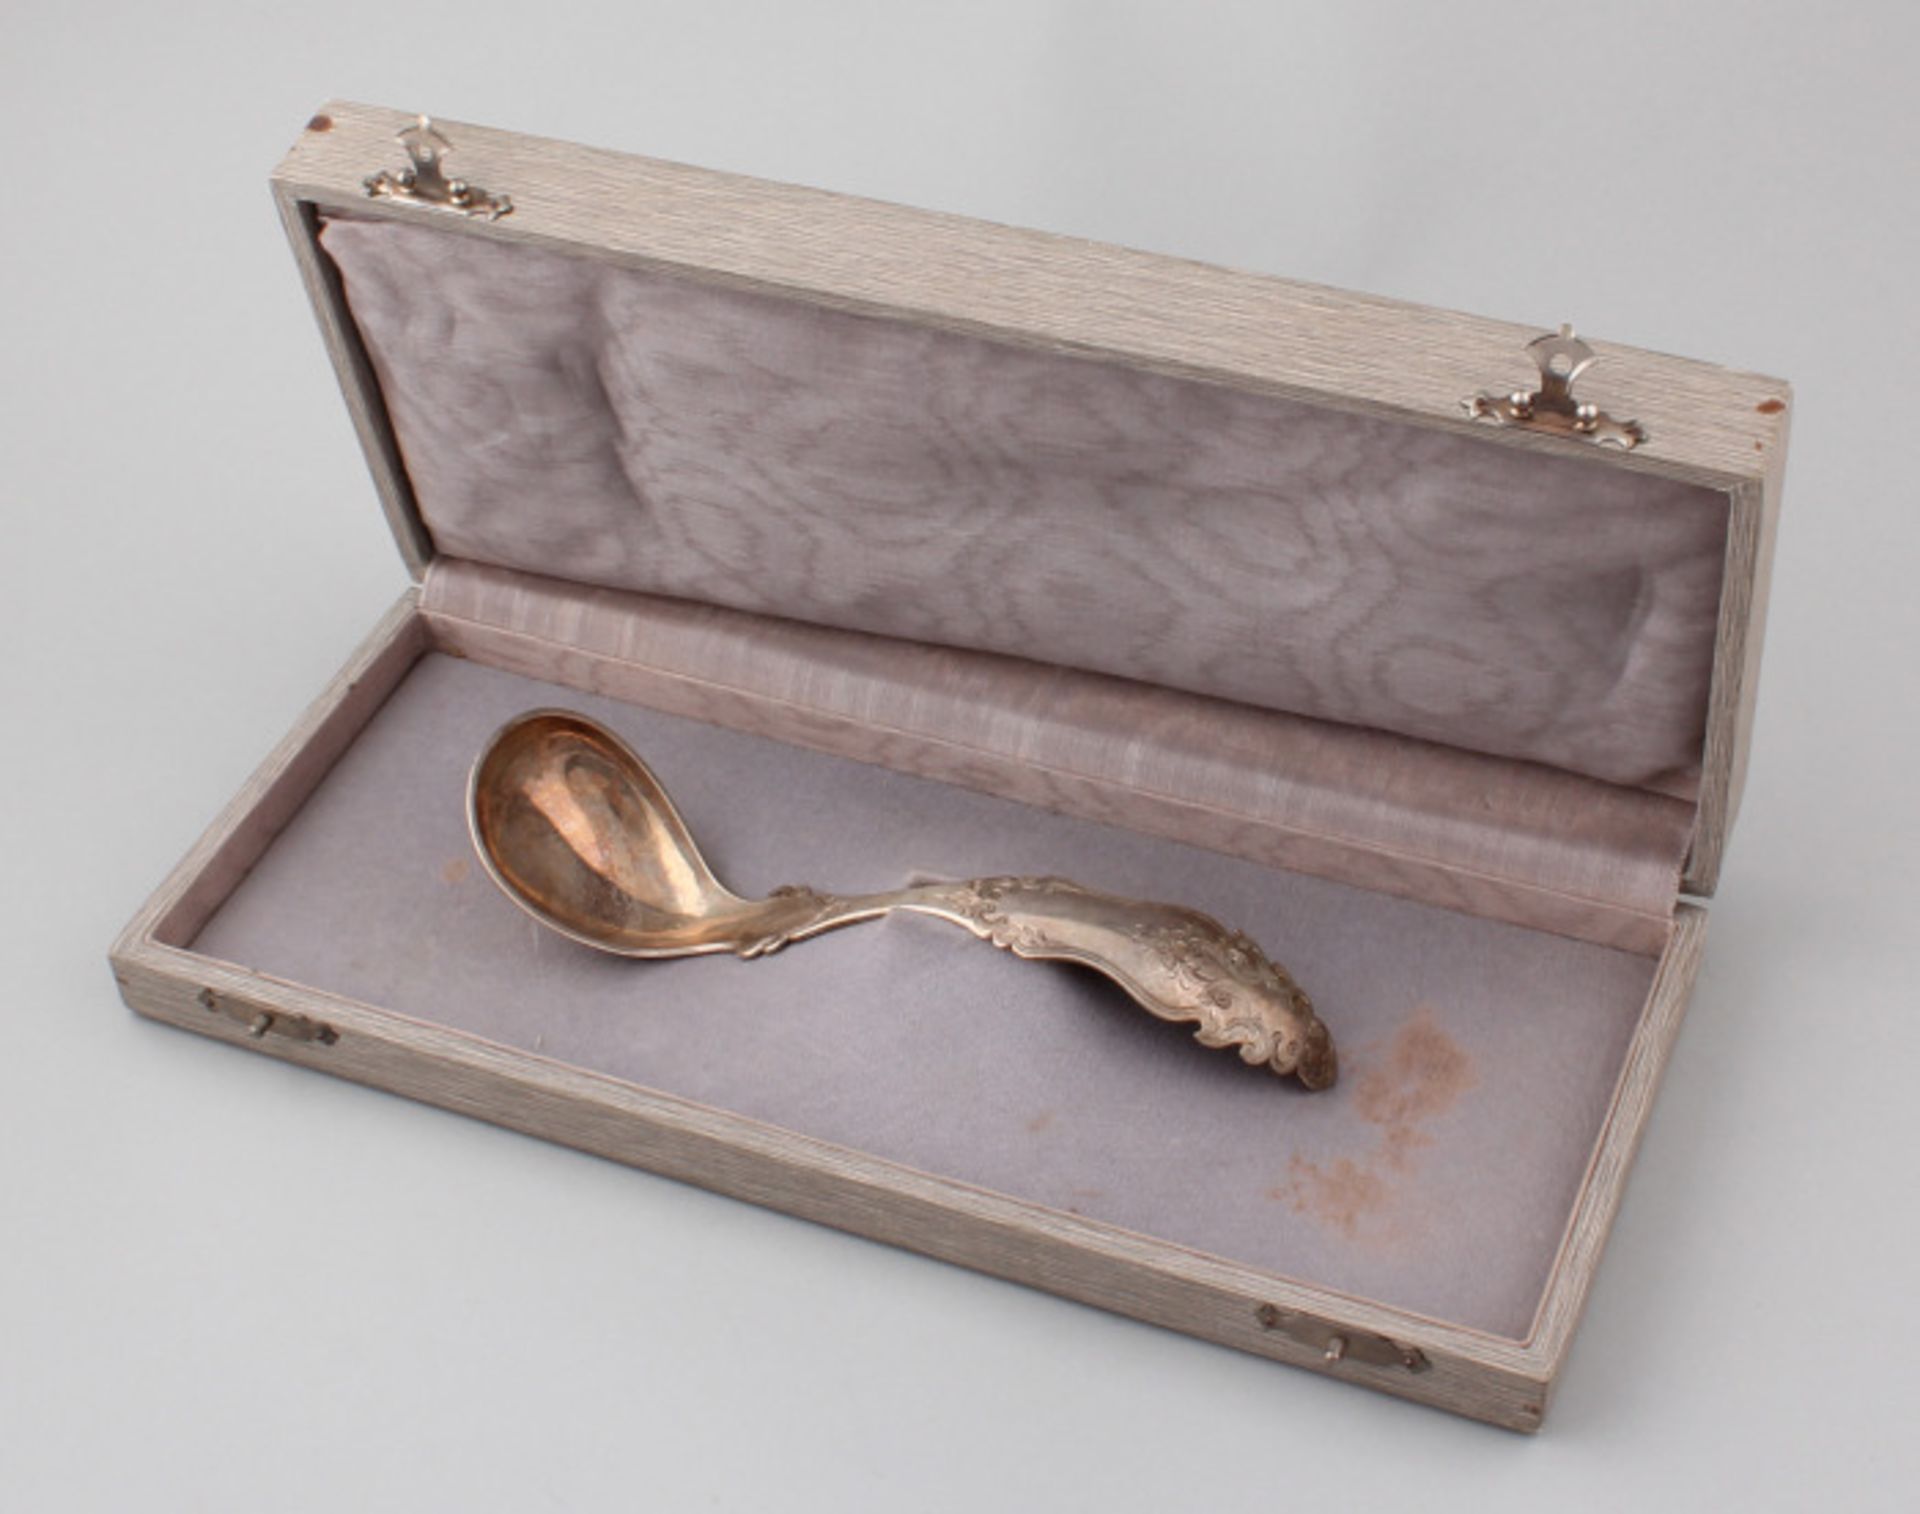 Ornate beautifully crafted silver compote spoon, 835/000, Hollands, in box. Generous compote spoon